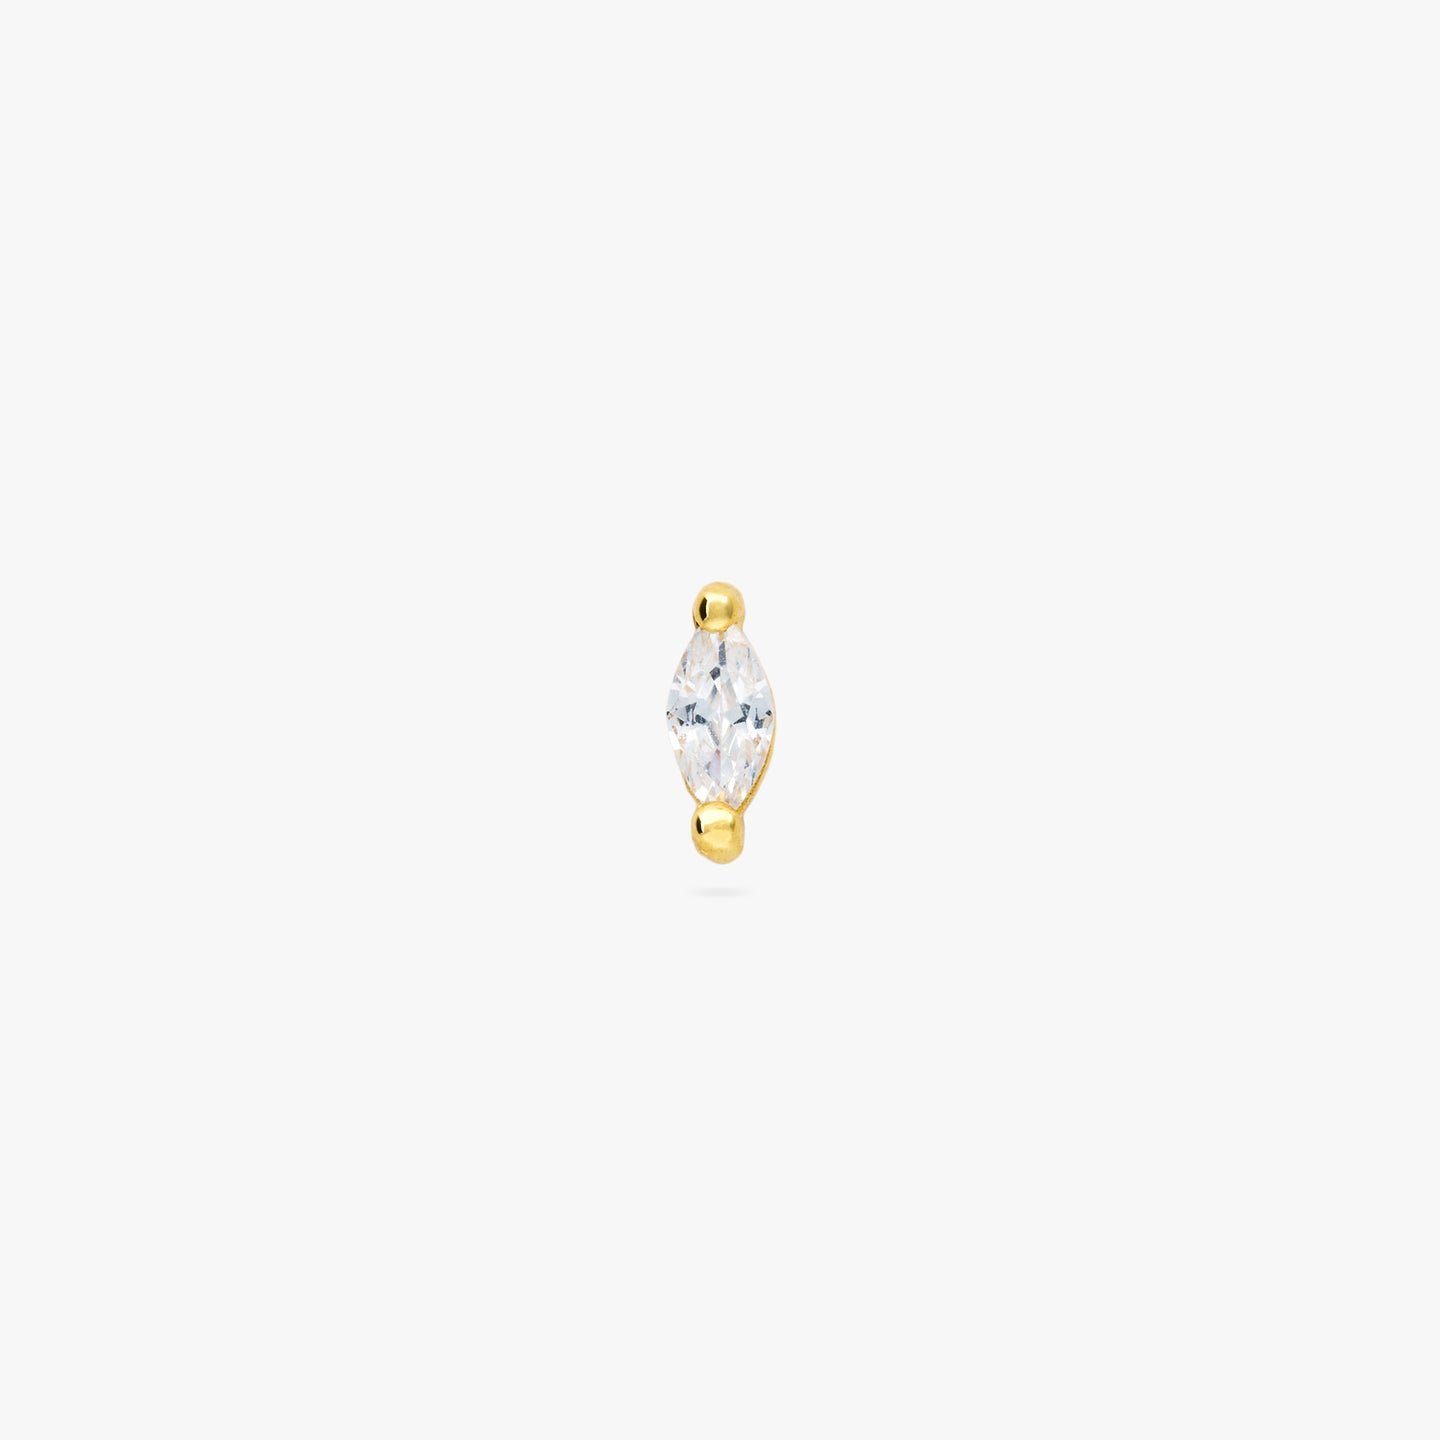 This is a marquise mini stud featuring a clear oblong shaped gem and has gold accents. color:null|gold/clear